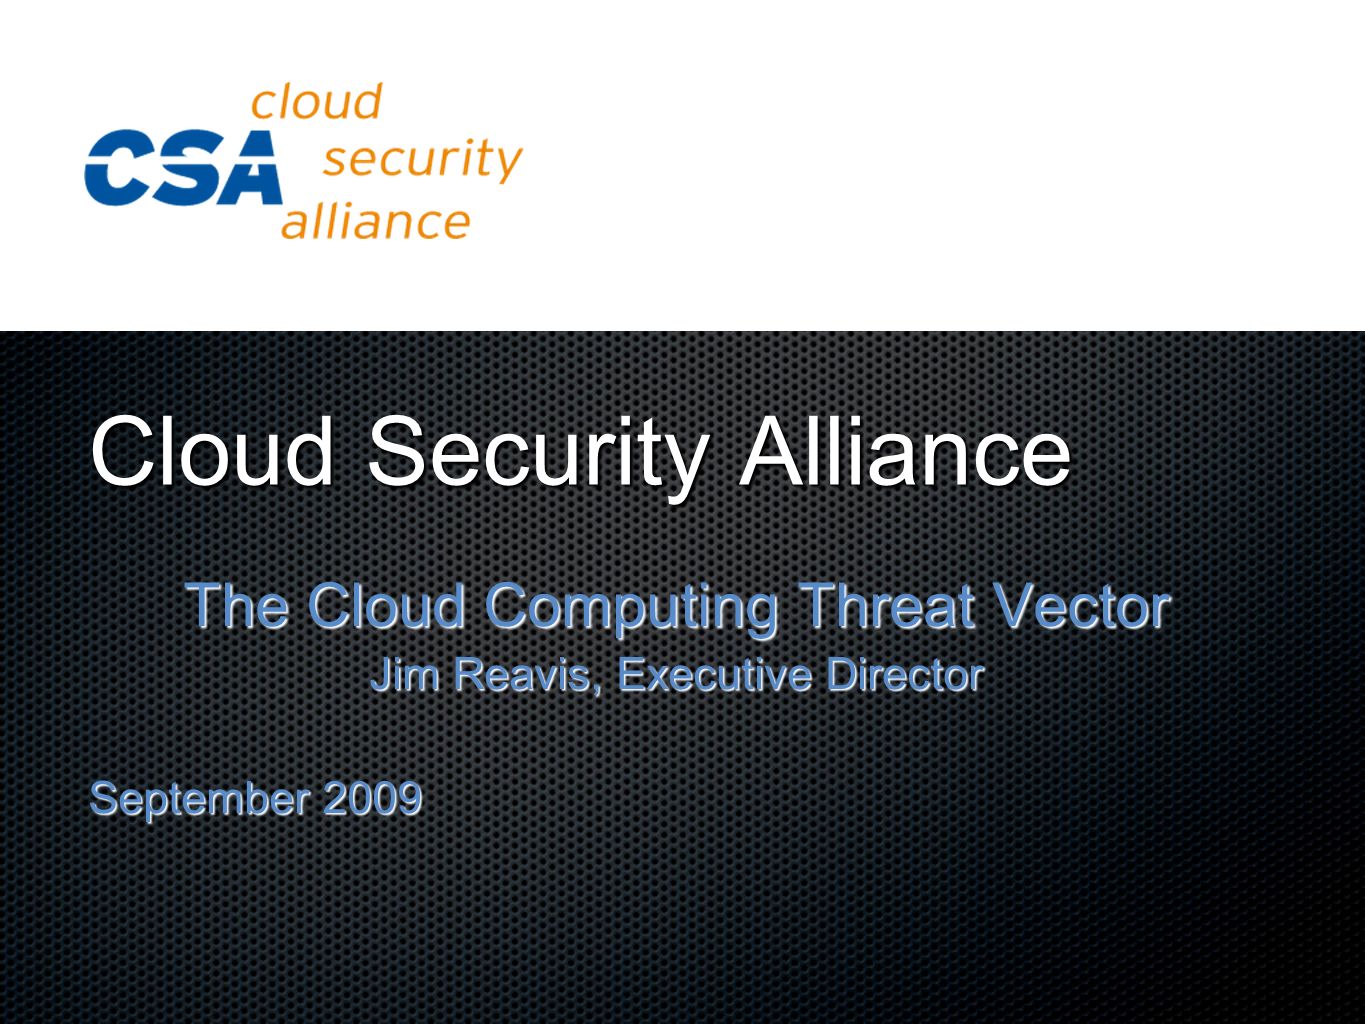 Cloud Security Alliance - ppt video online download